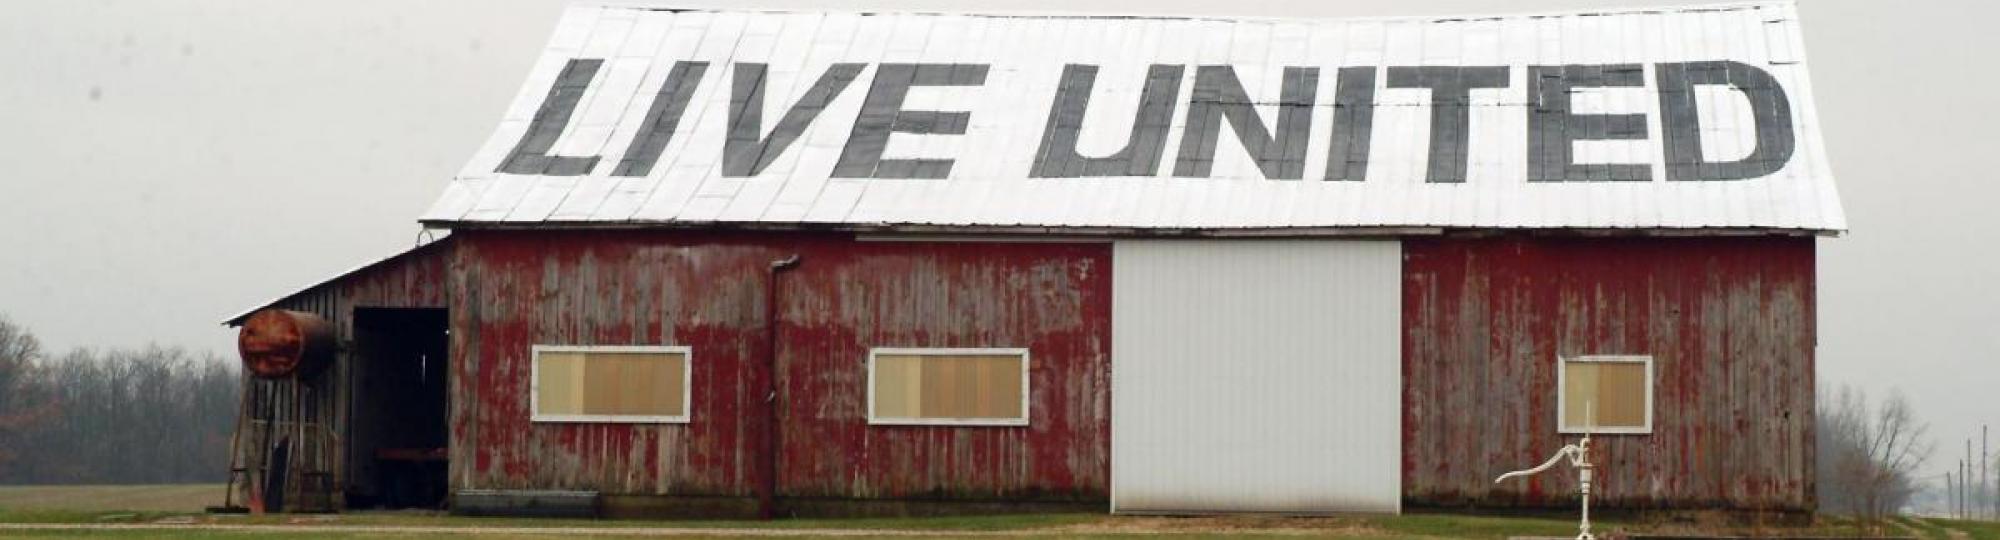 barn with live united slogan painted on roof